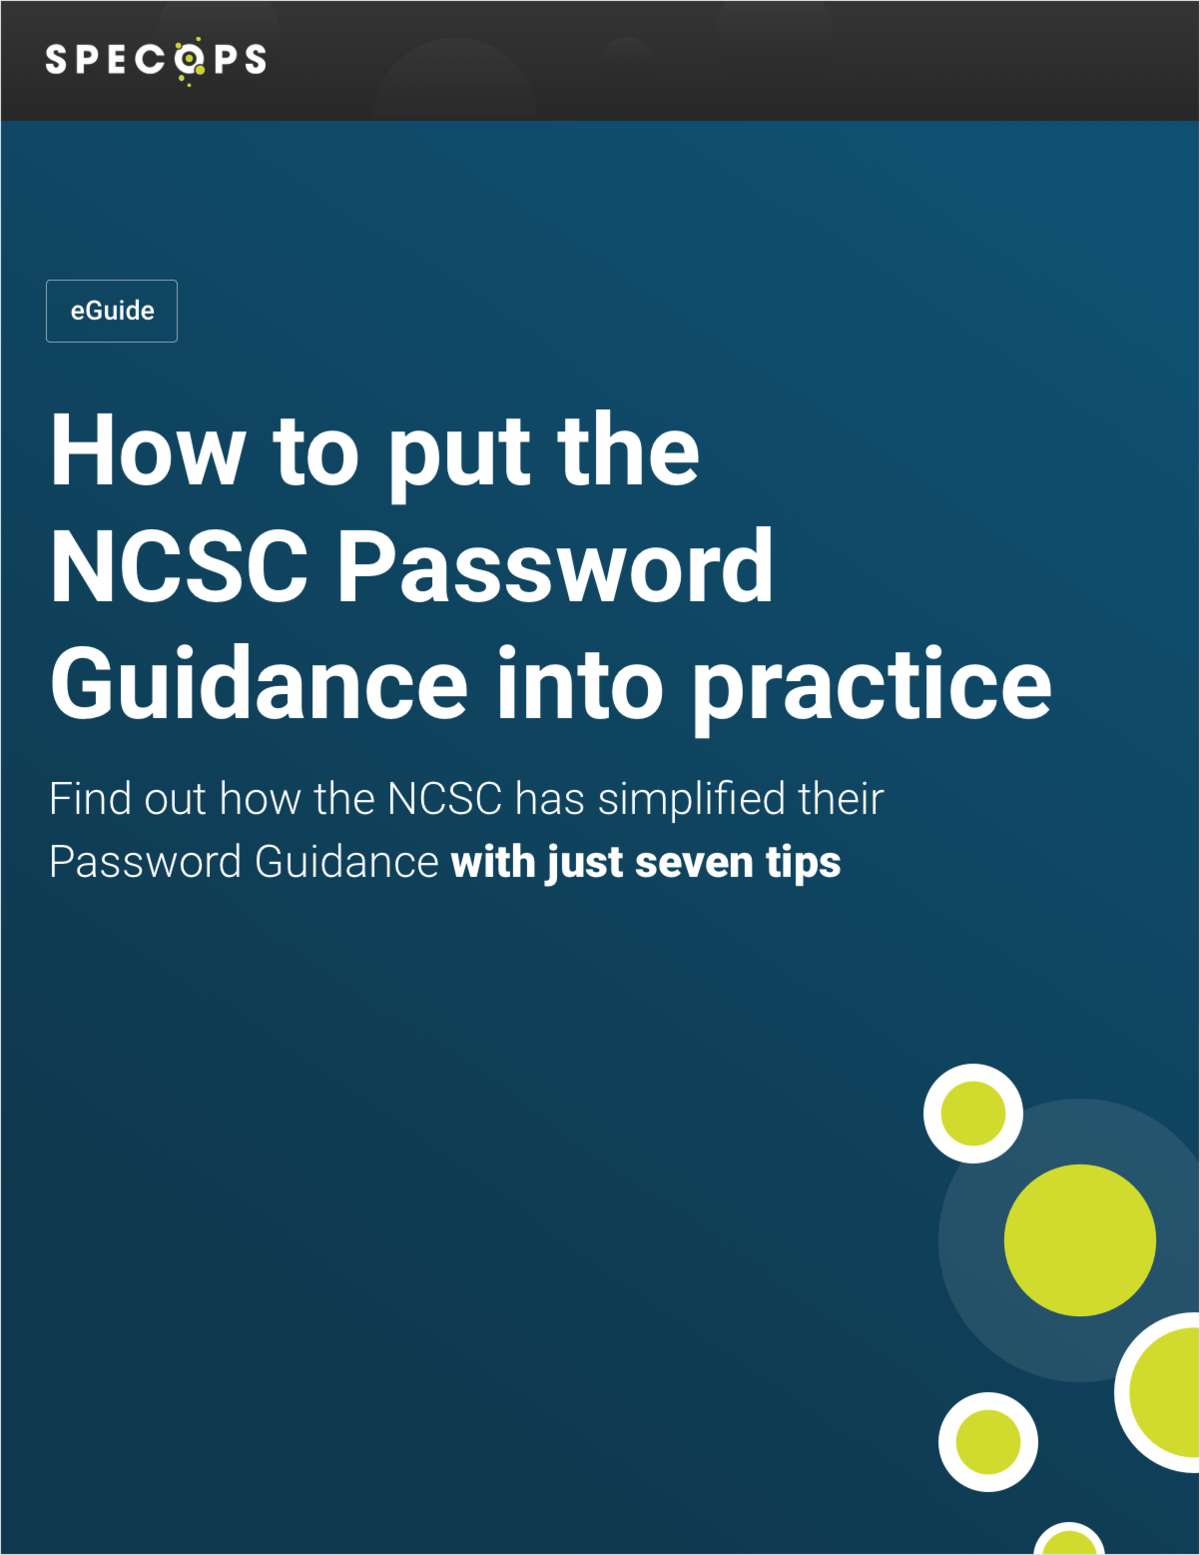 Putting the NCSC Password Guidance into practice